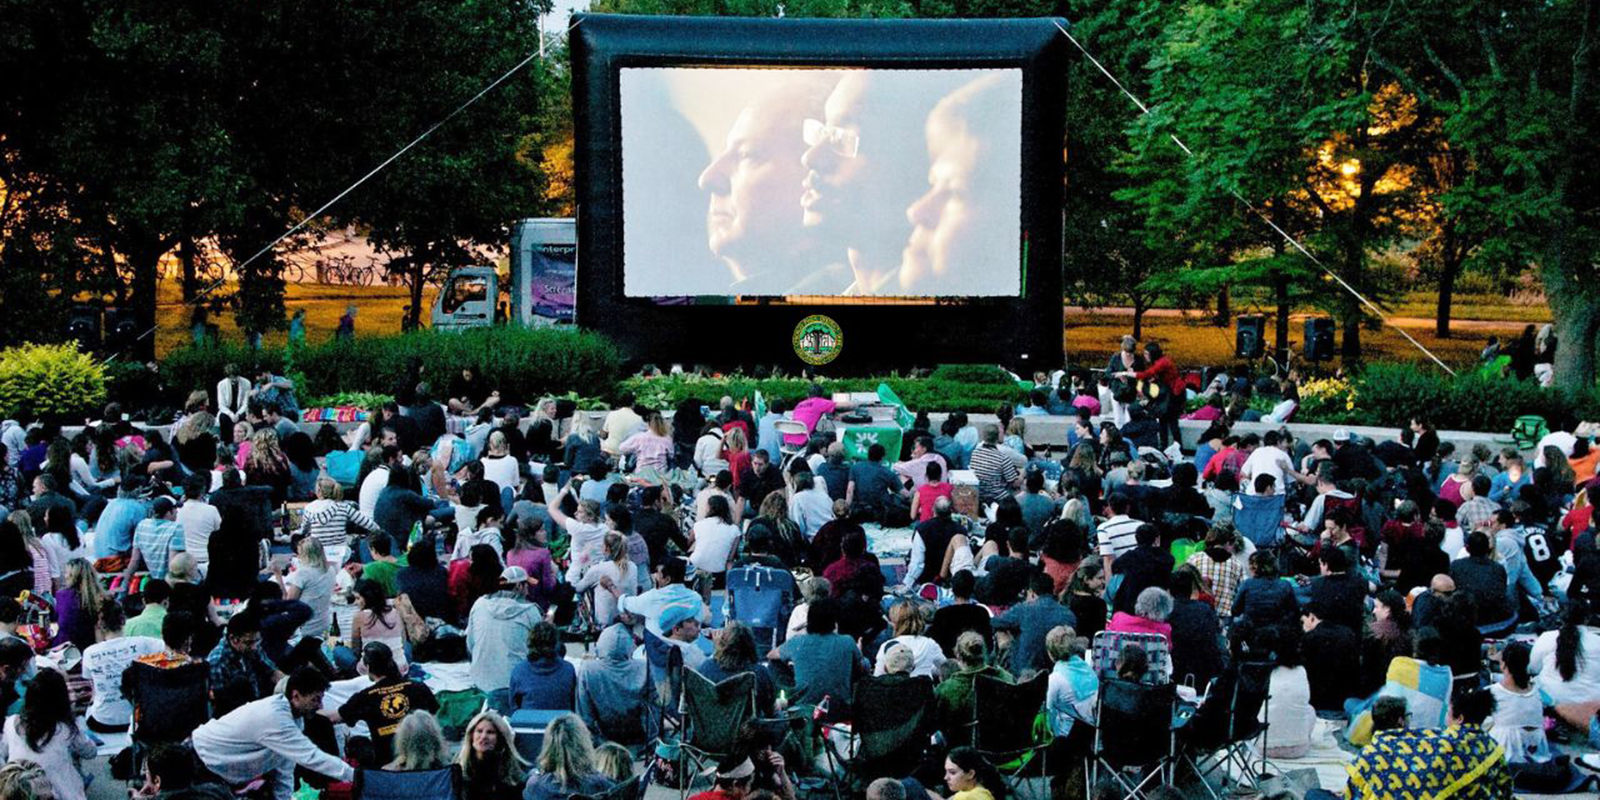 A crowd watches a movie in a Chicago park on a large screen